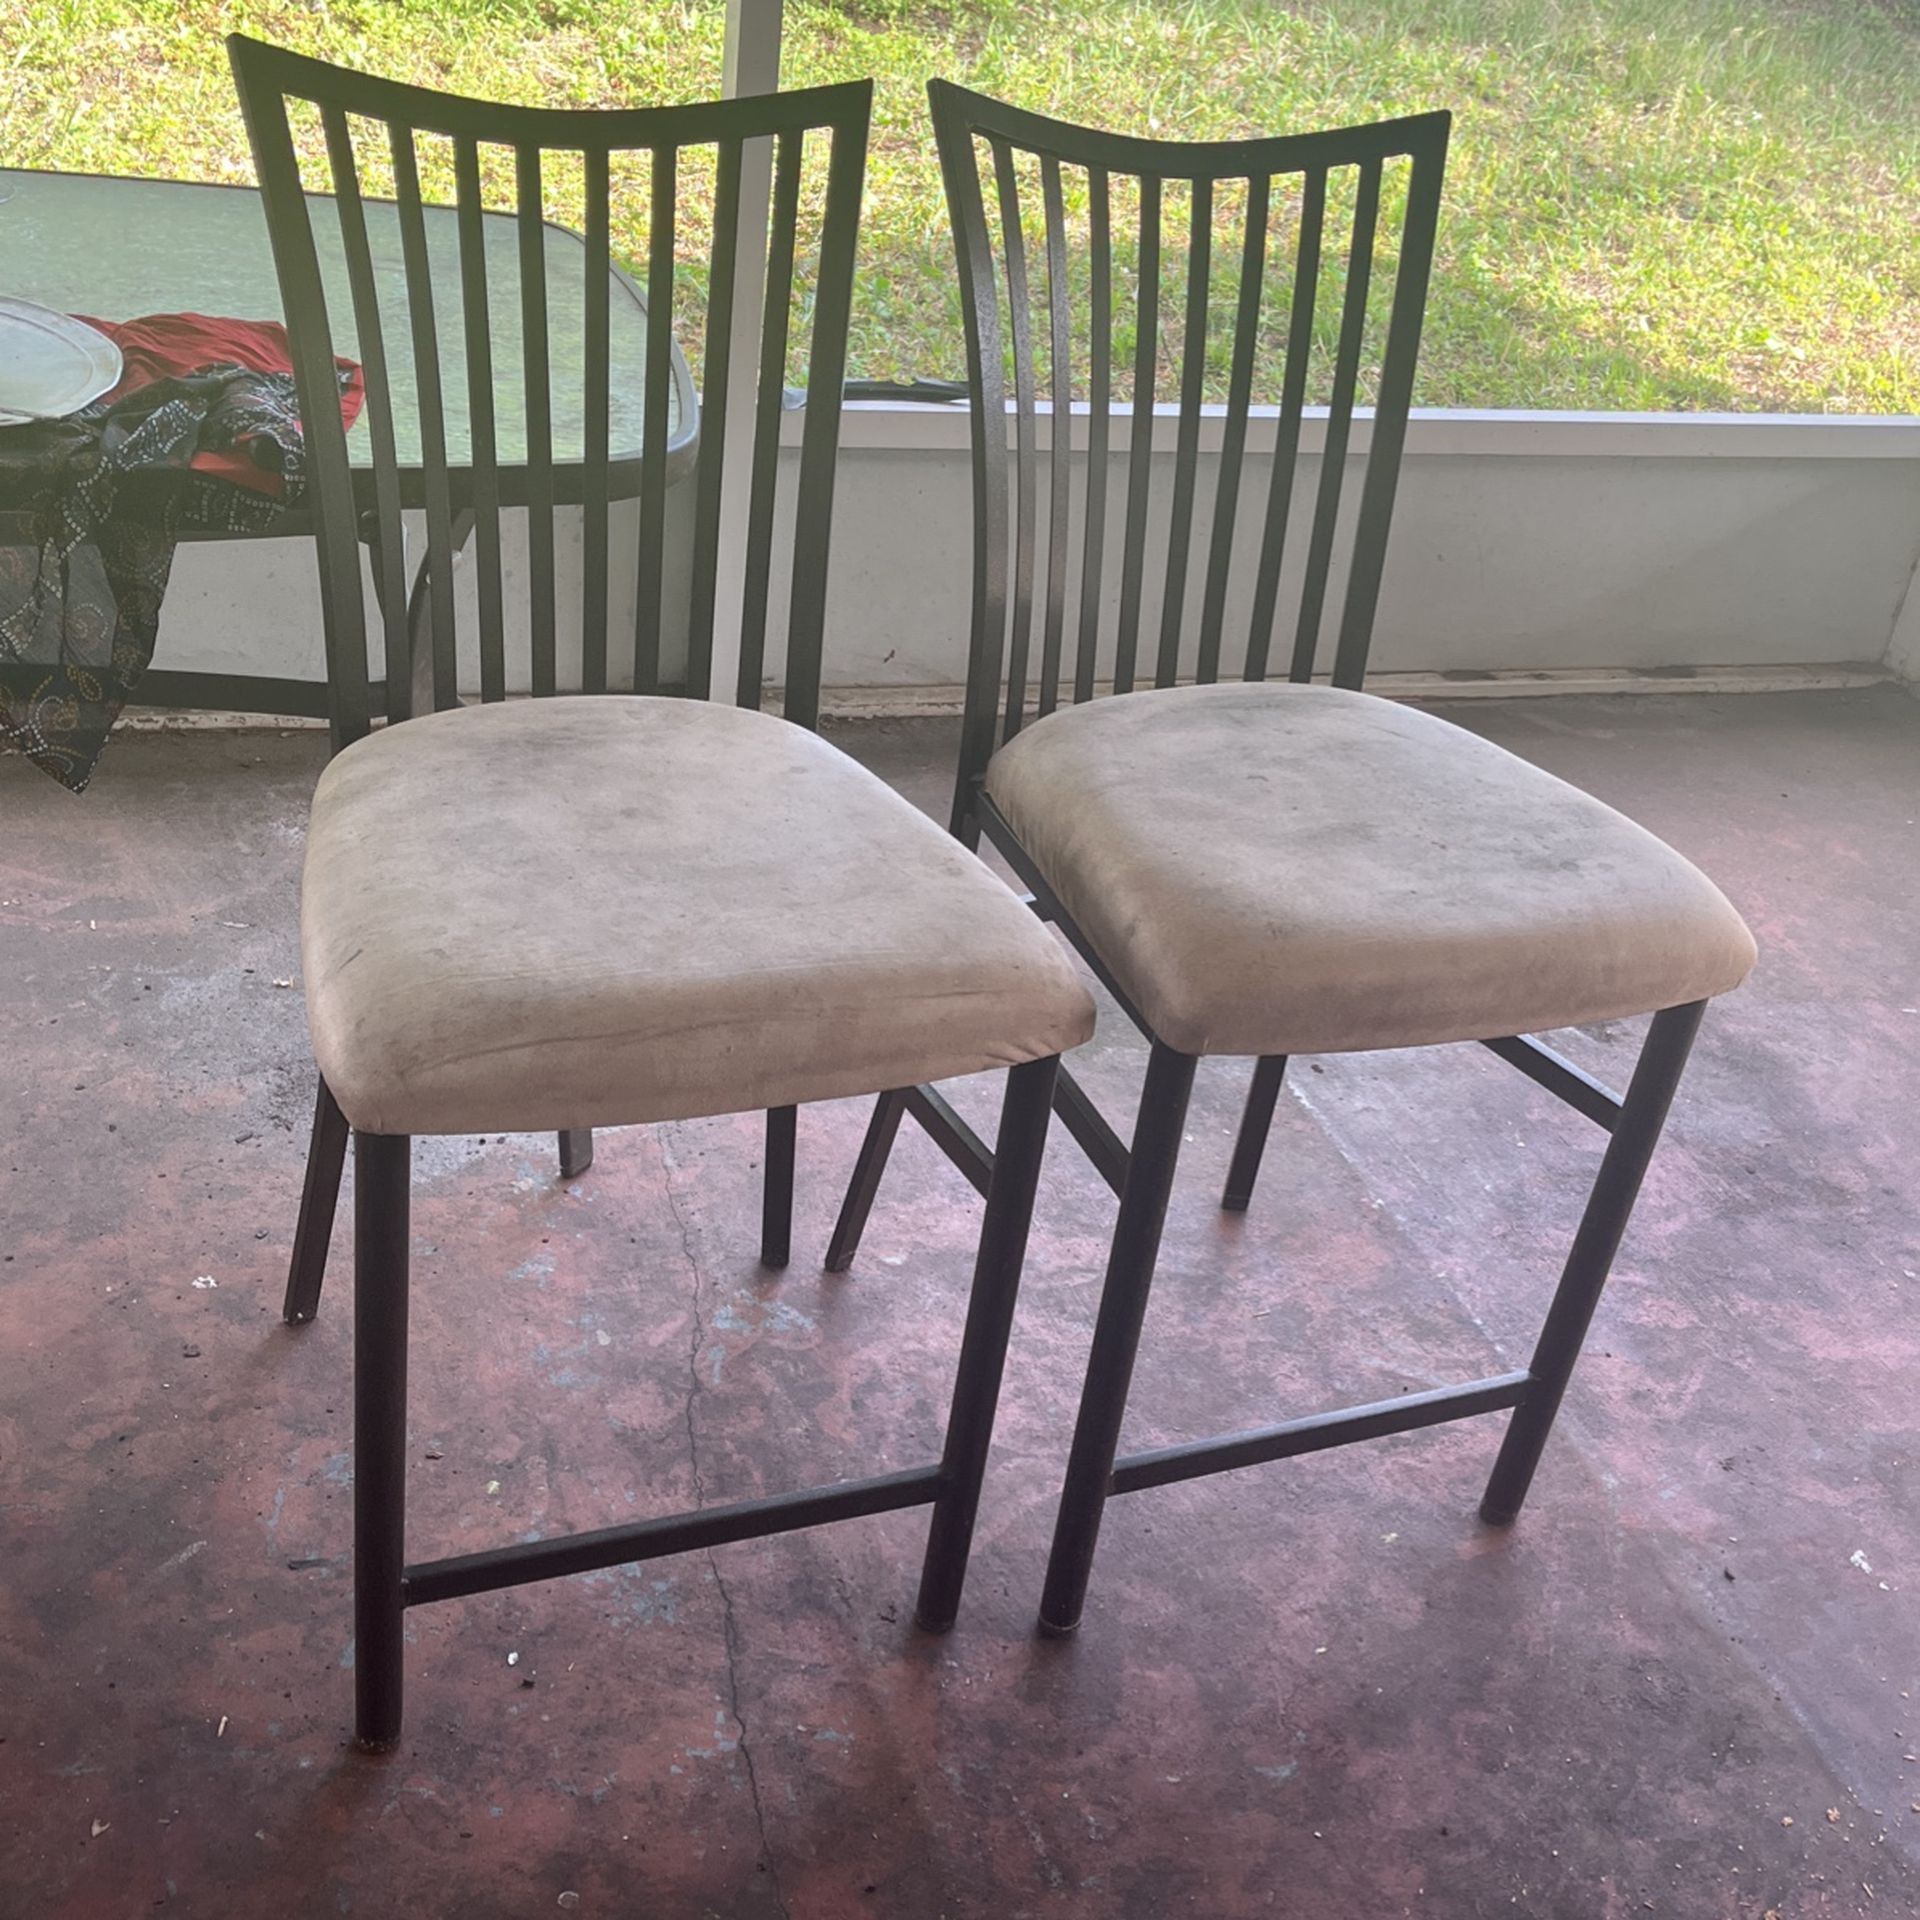 Two High Chairs   3 For $40